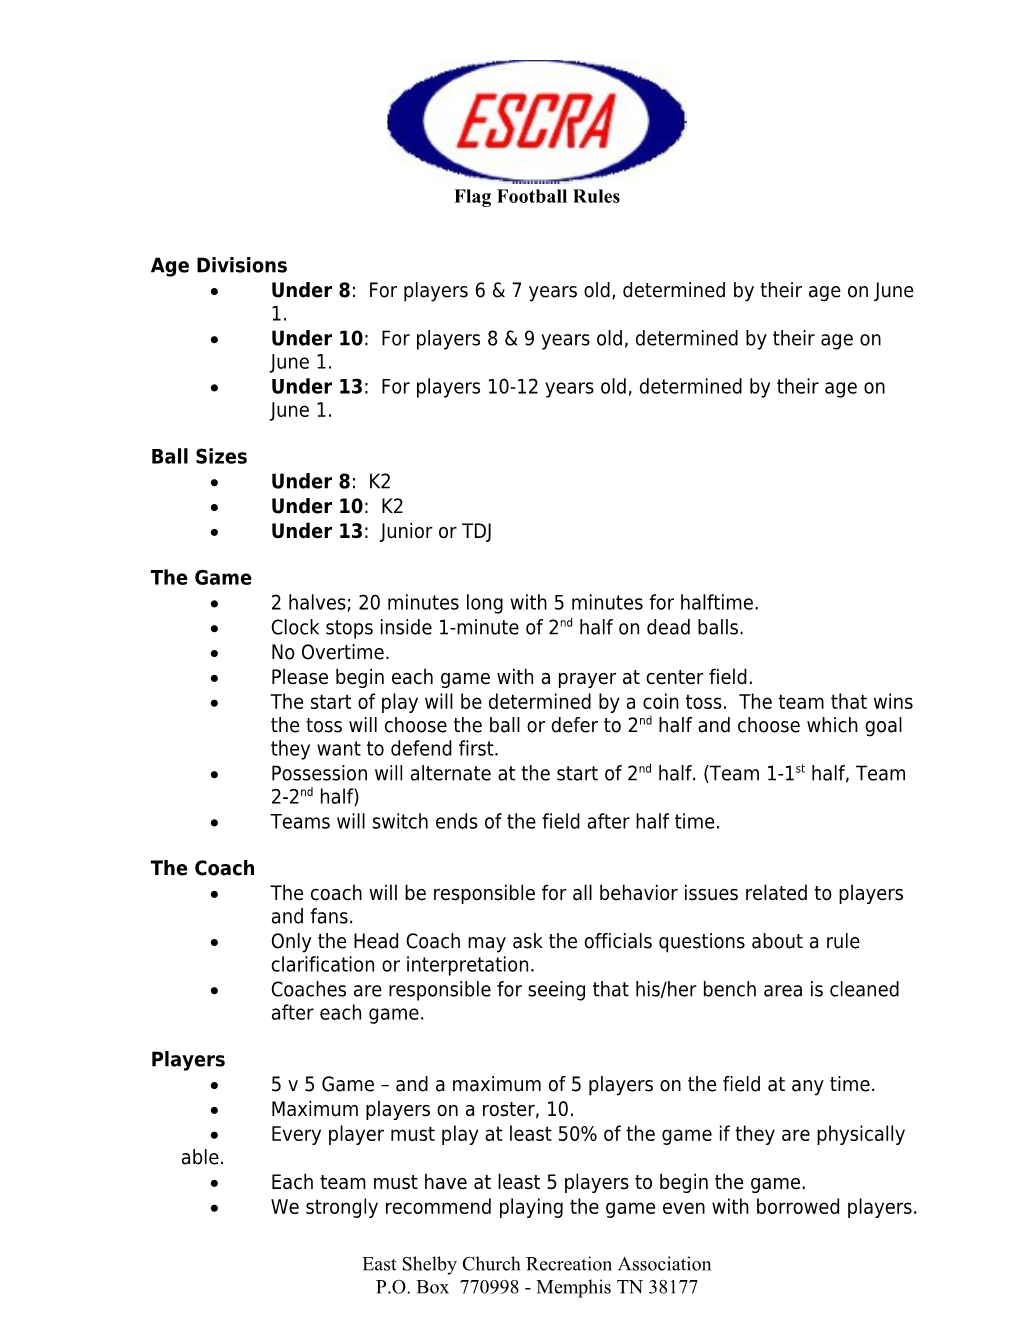 Under 6 Soccer Modified Rules 2003 (Page 1)